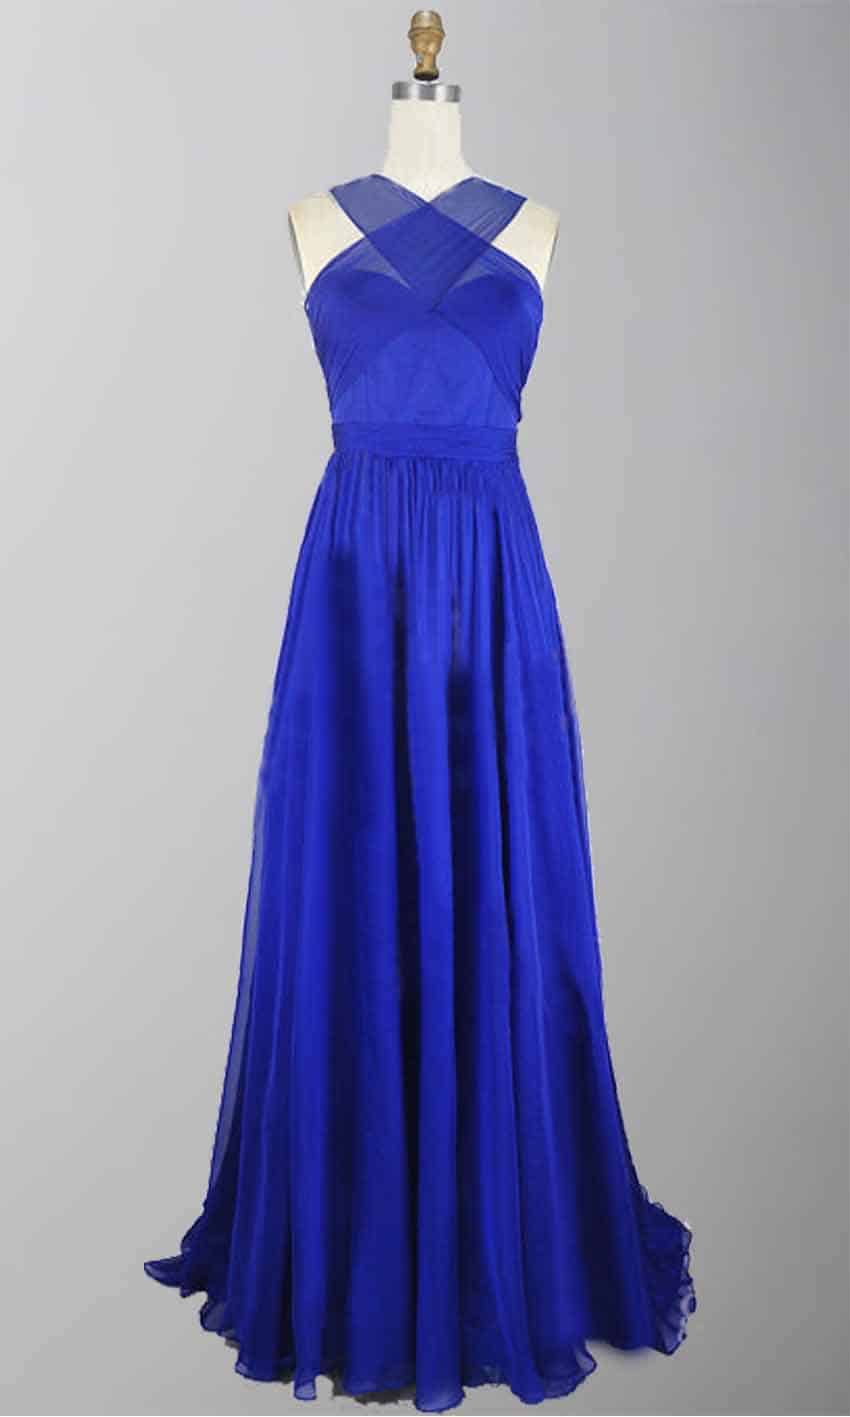 Blue Cross Strap Cut Out Long Formal Chiffon Prom Dress with Train P273